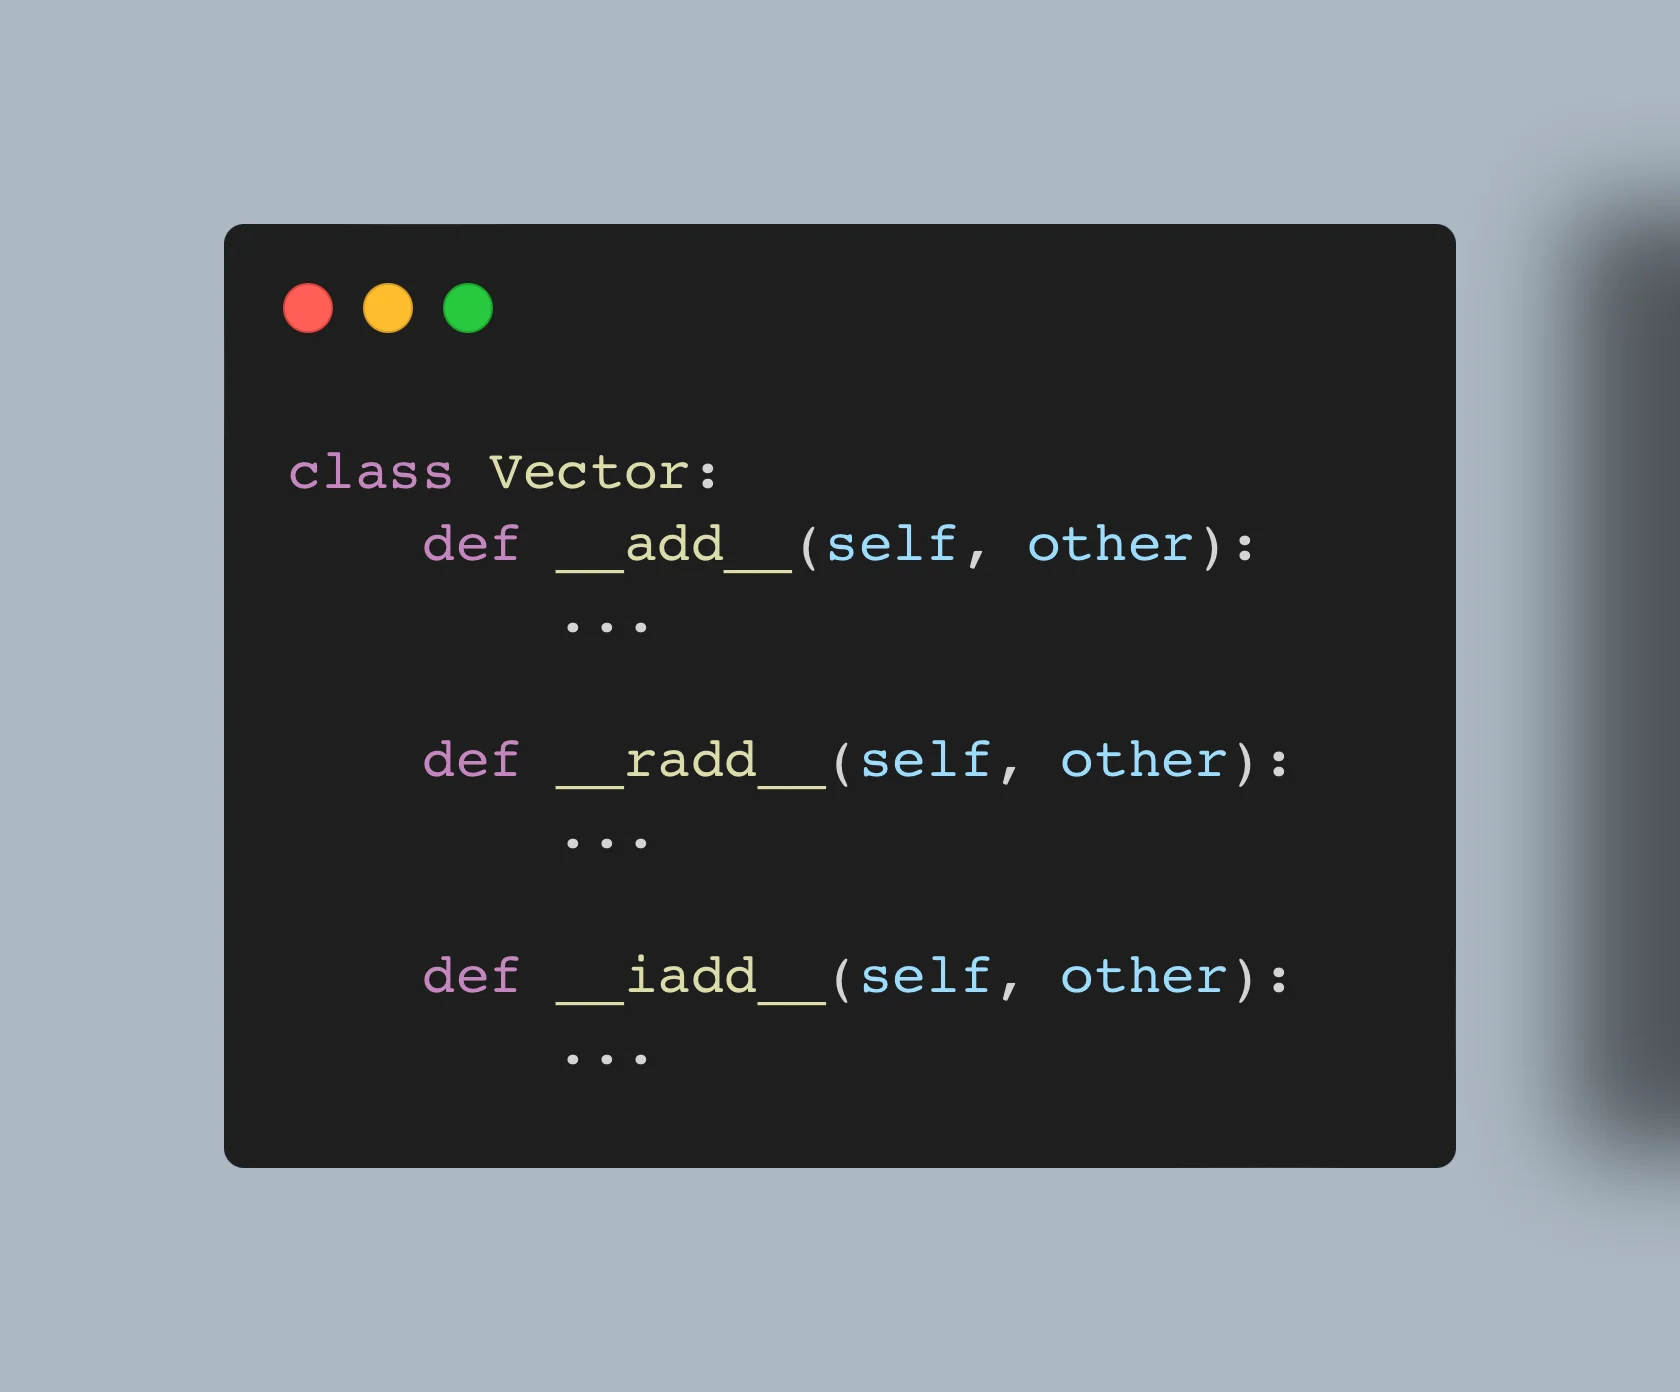 The Right Way To Overload Methods and Operators In Python